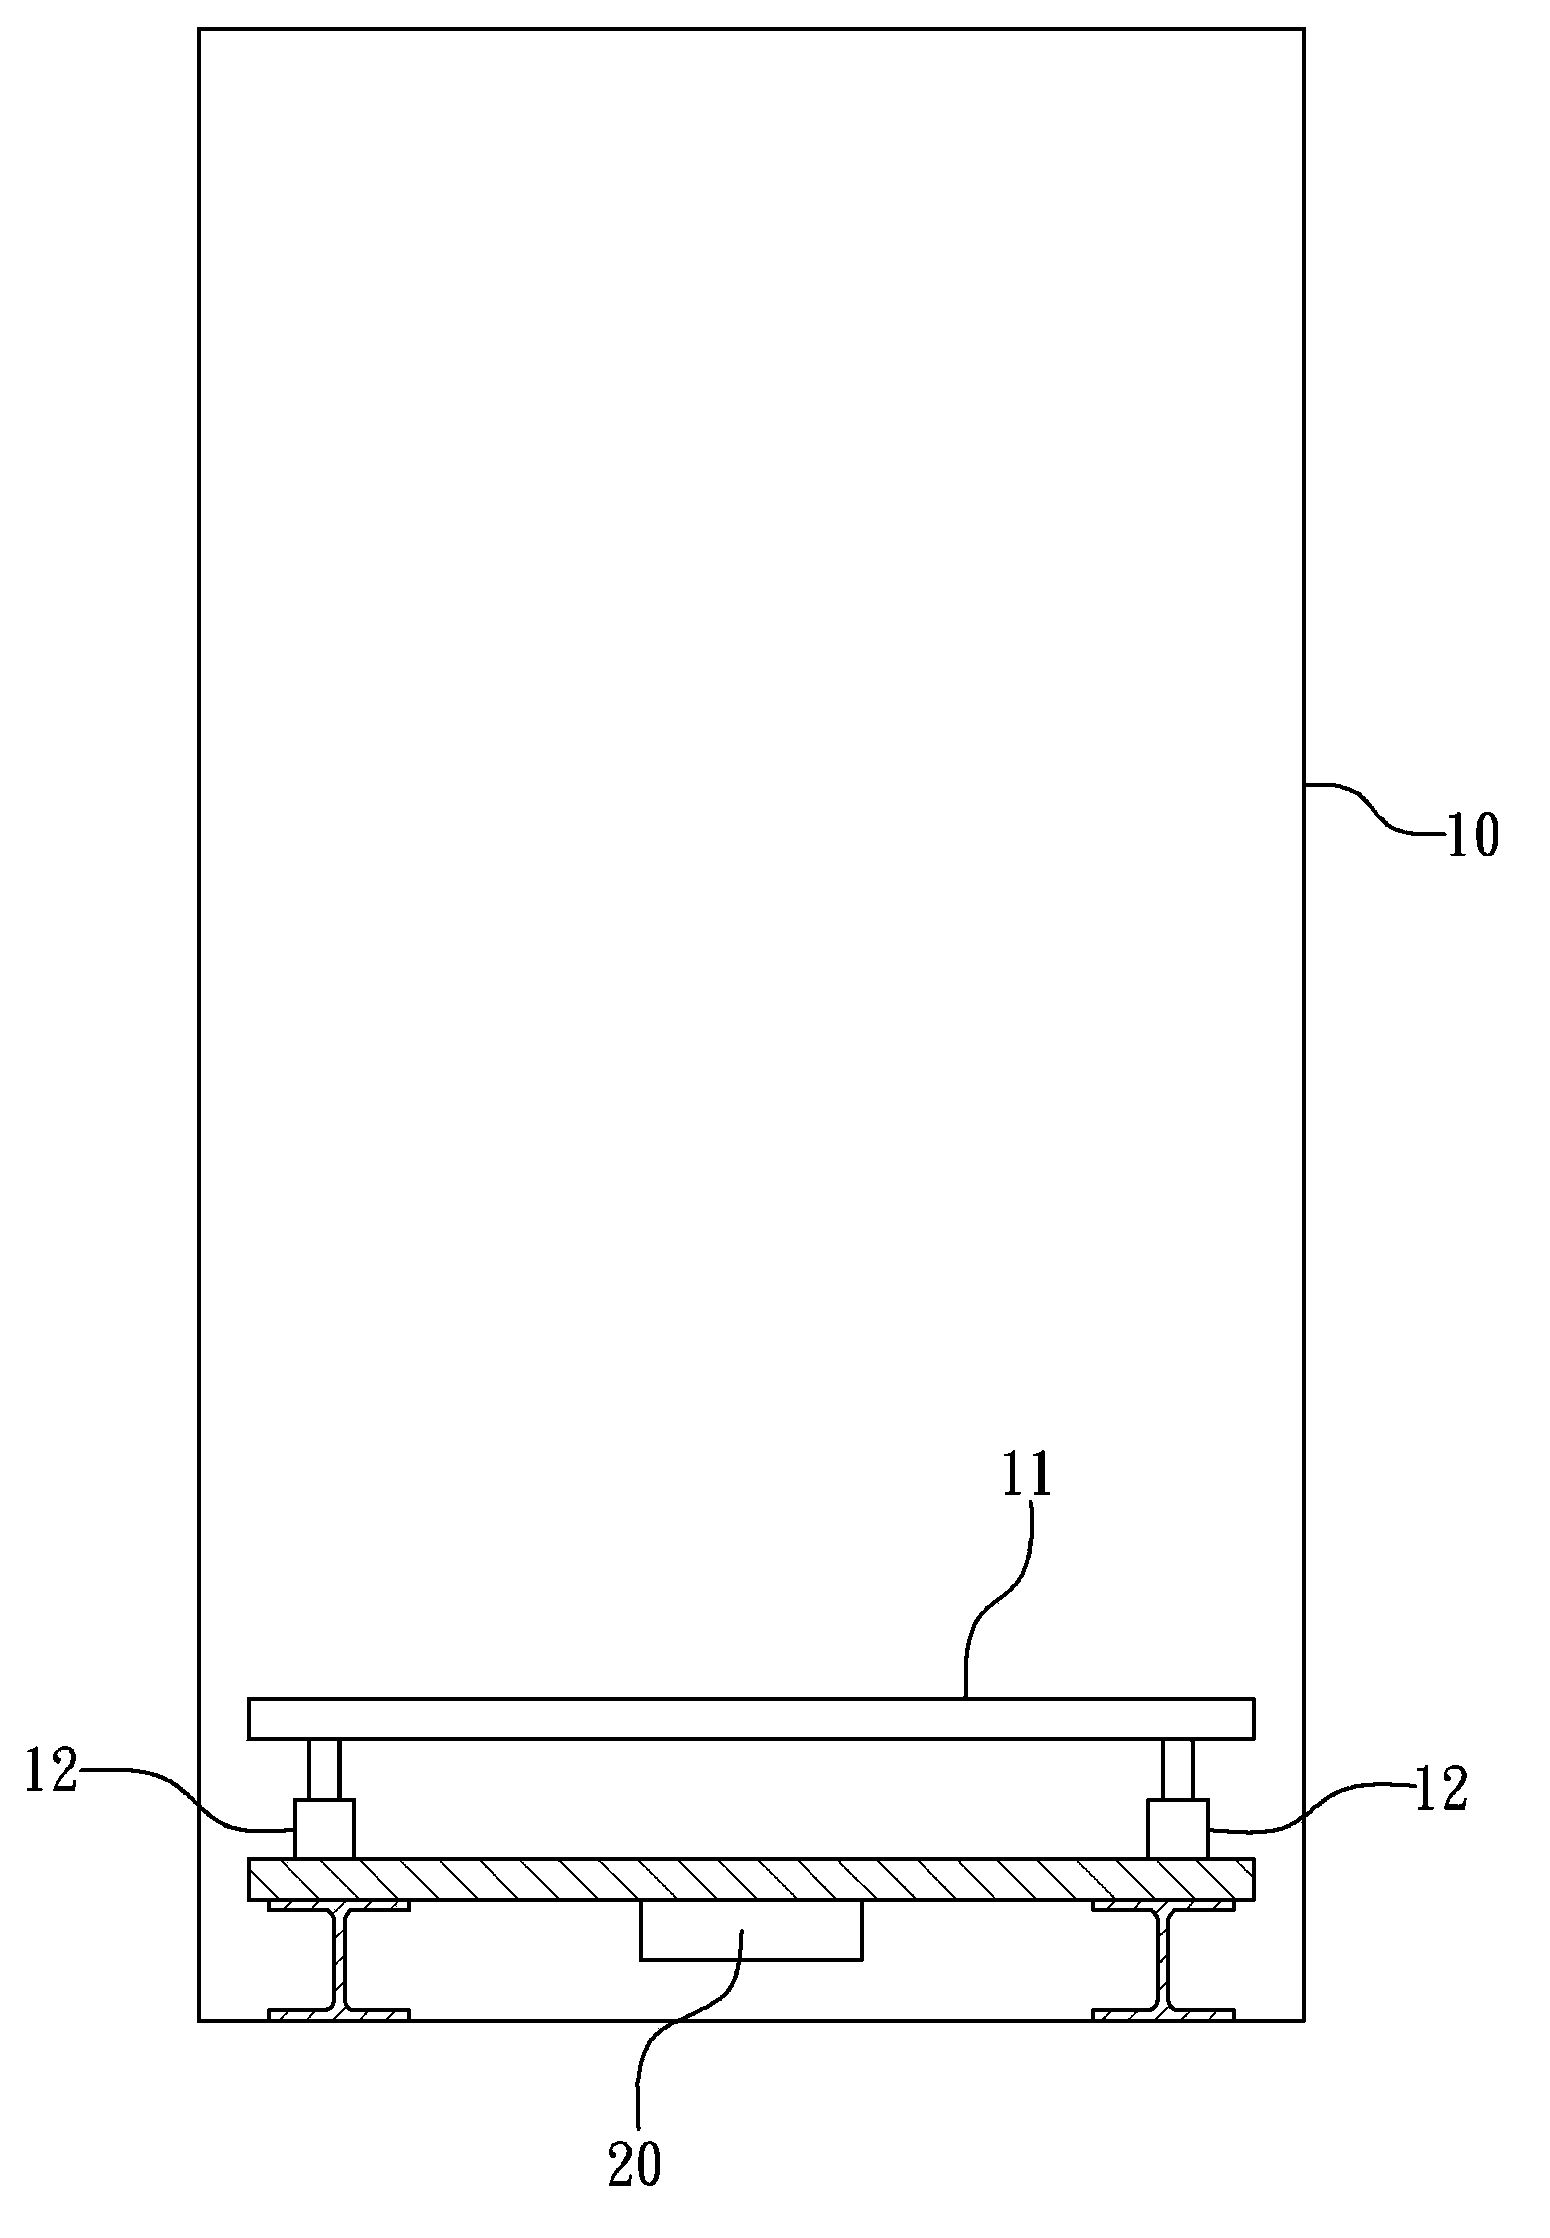 Environment-friendly energy-saving elevator control device and method